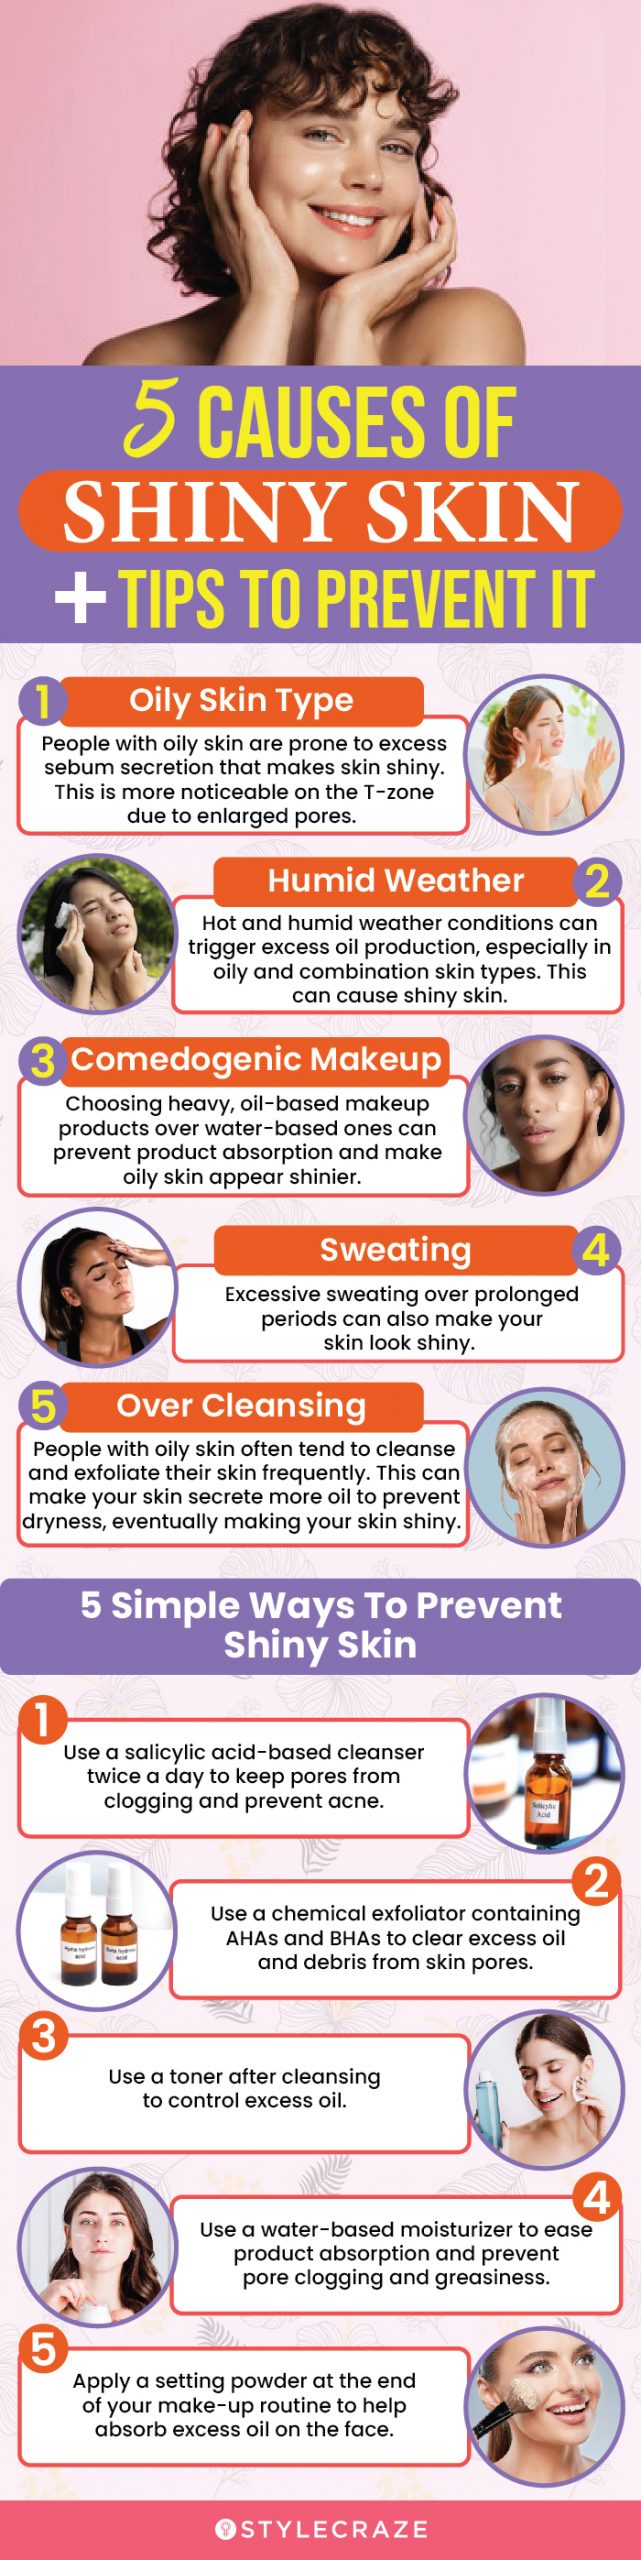 5 causes of shiny skin + tips to prevent it (infographic)